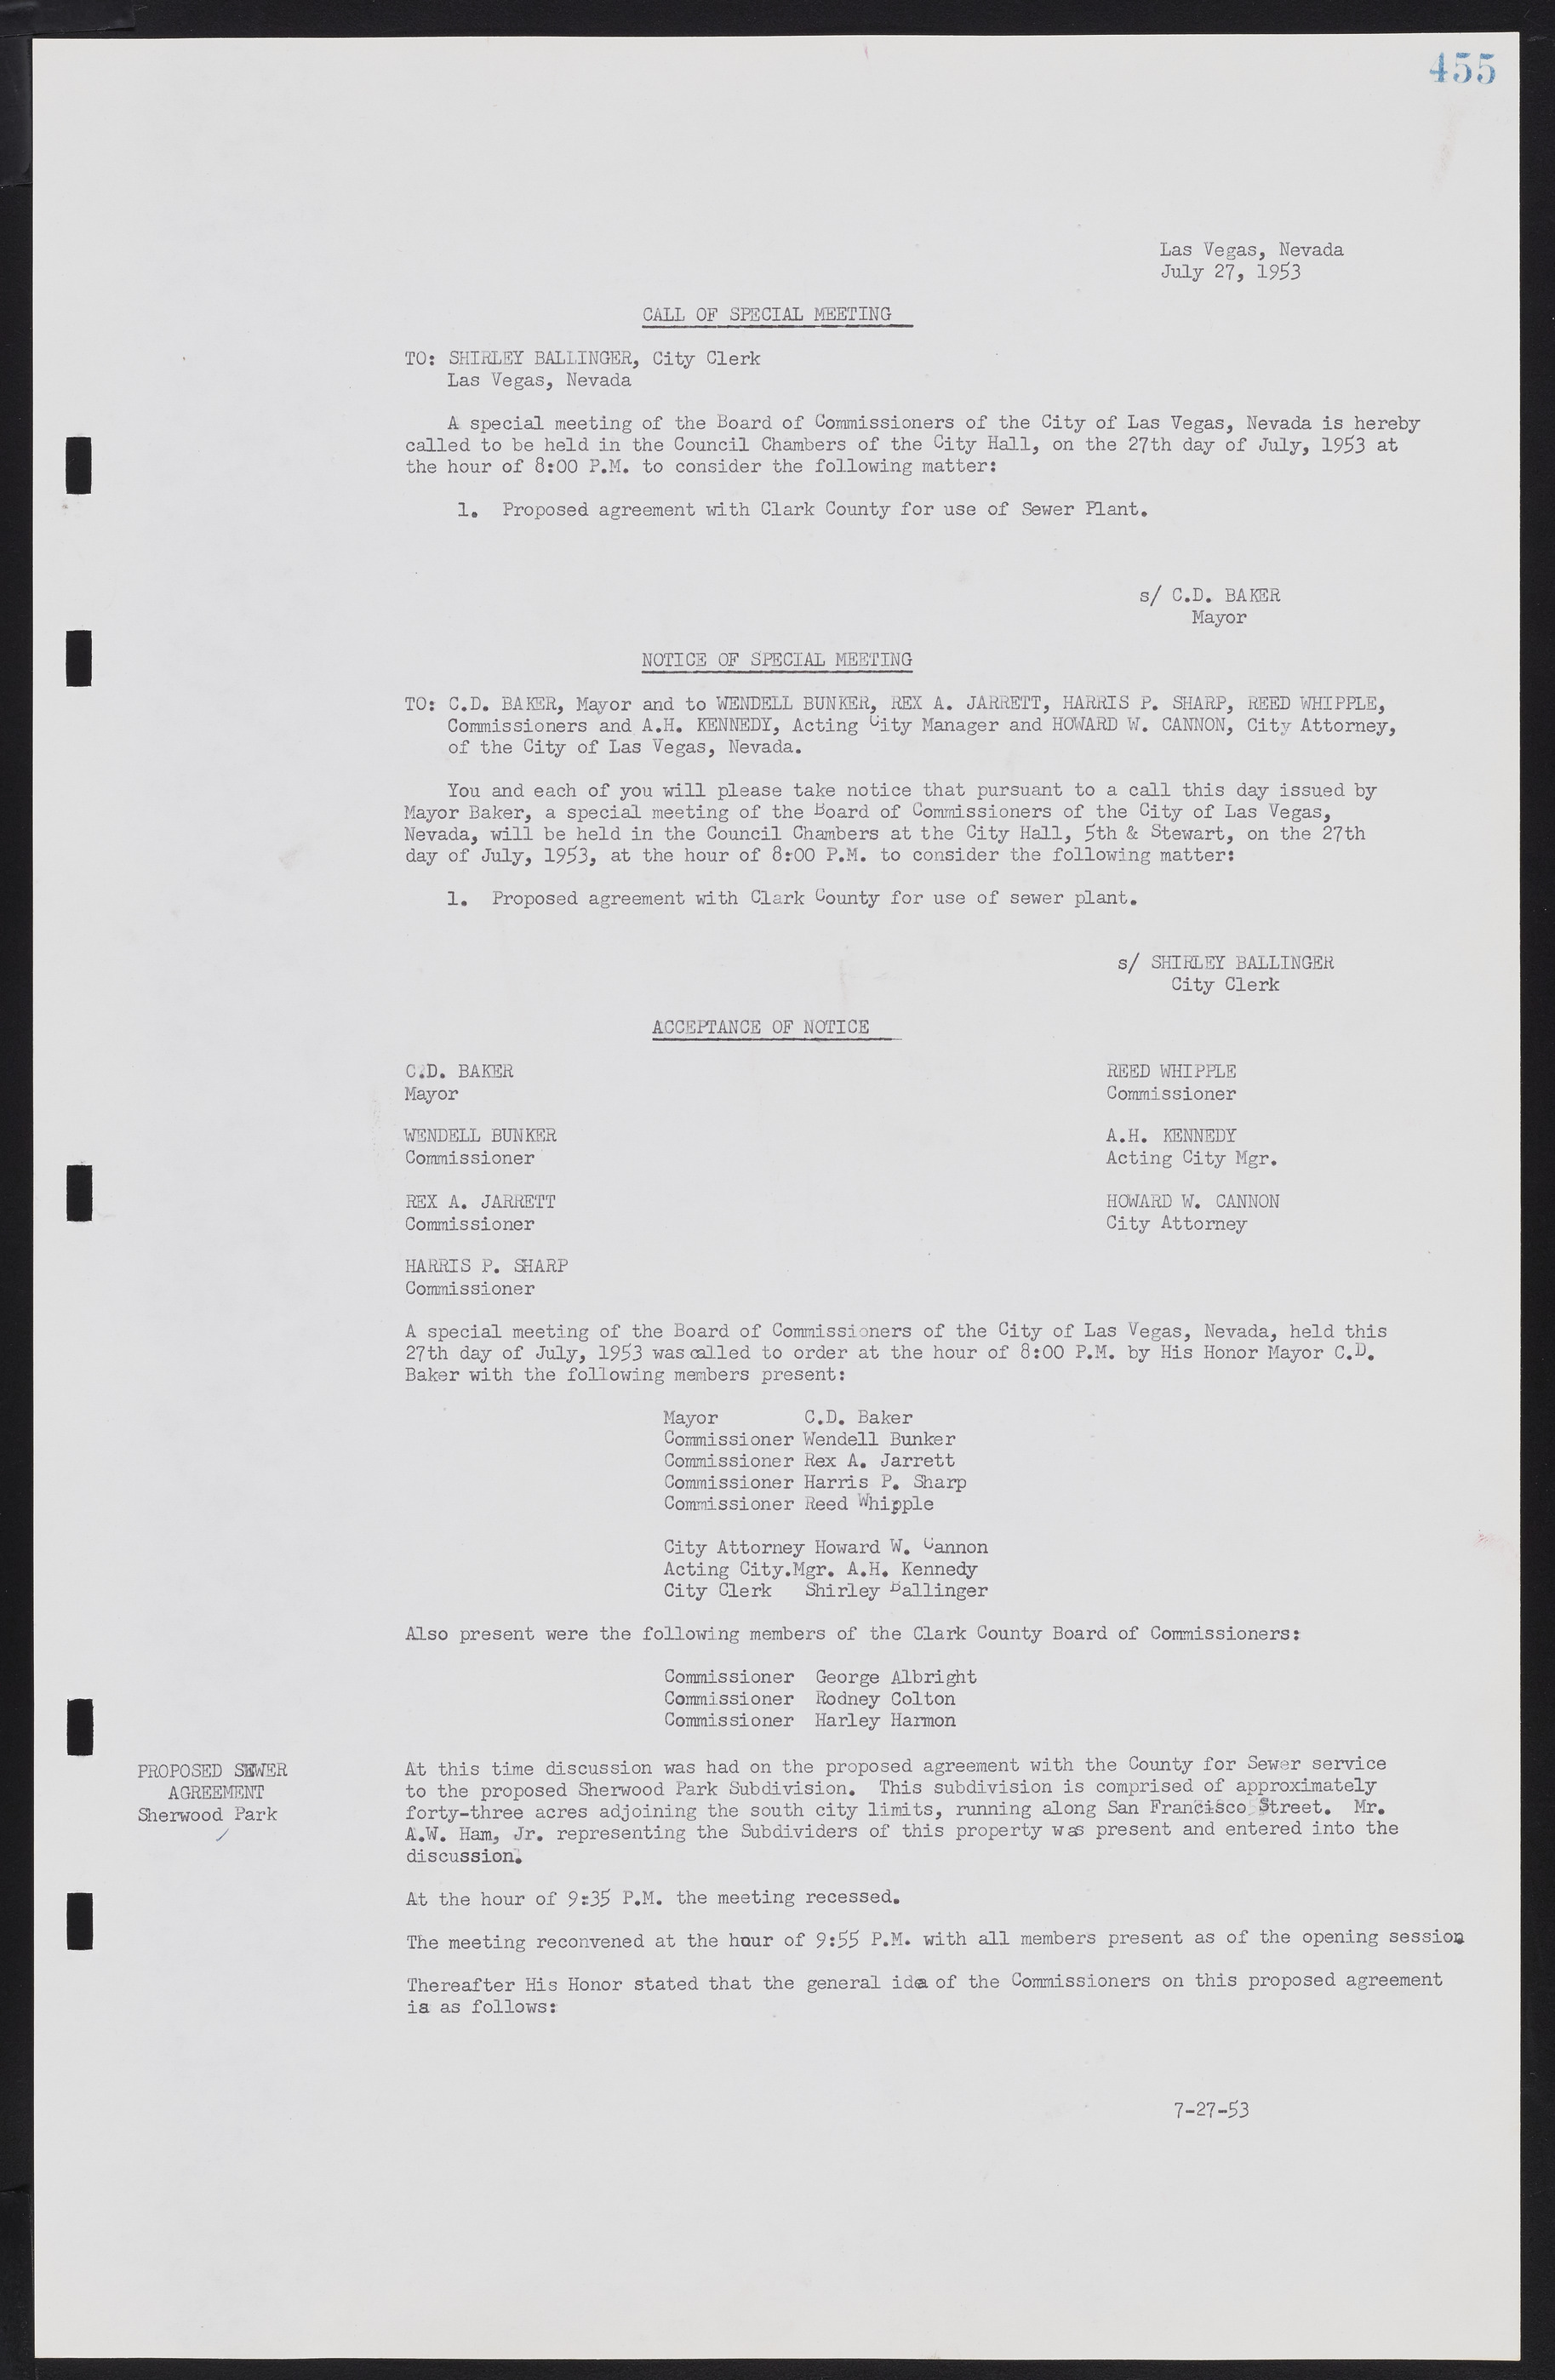 Las Vegas City Commission Minutes, May 26, 1952 to February 17, 1954, lvc000008-485